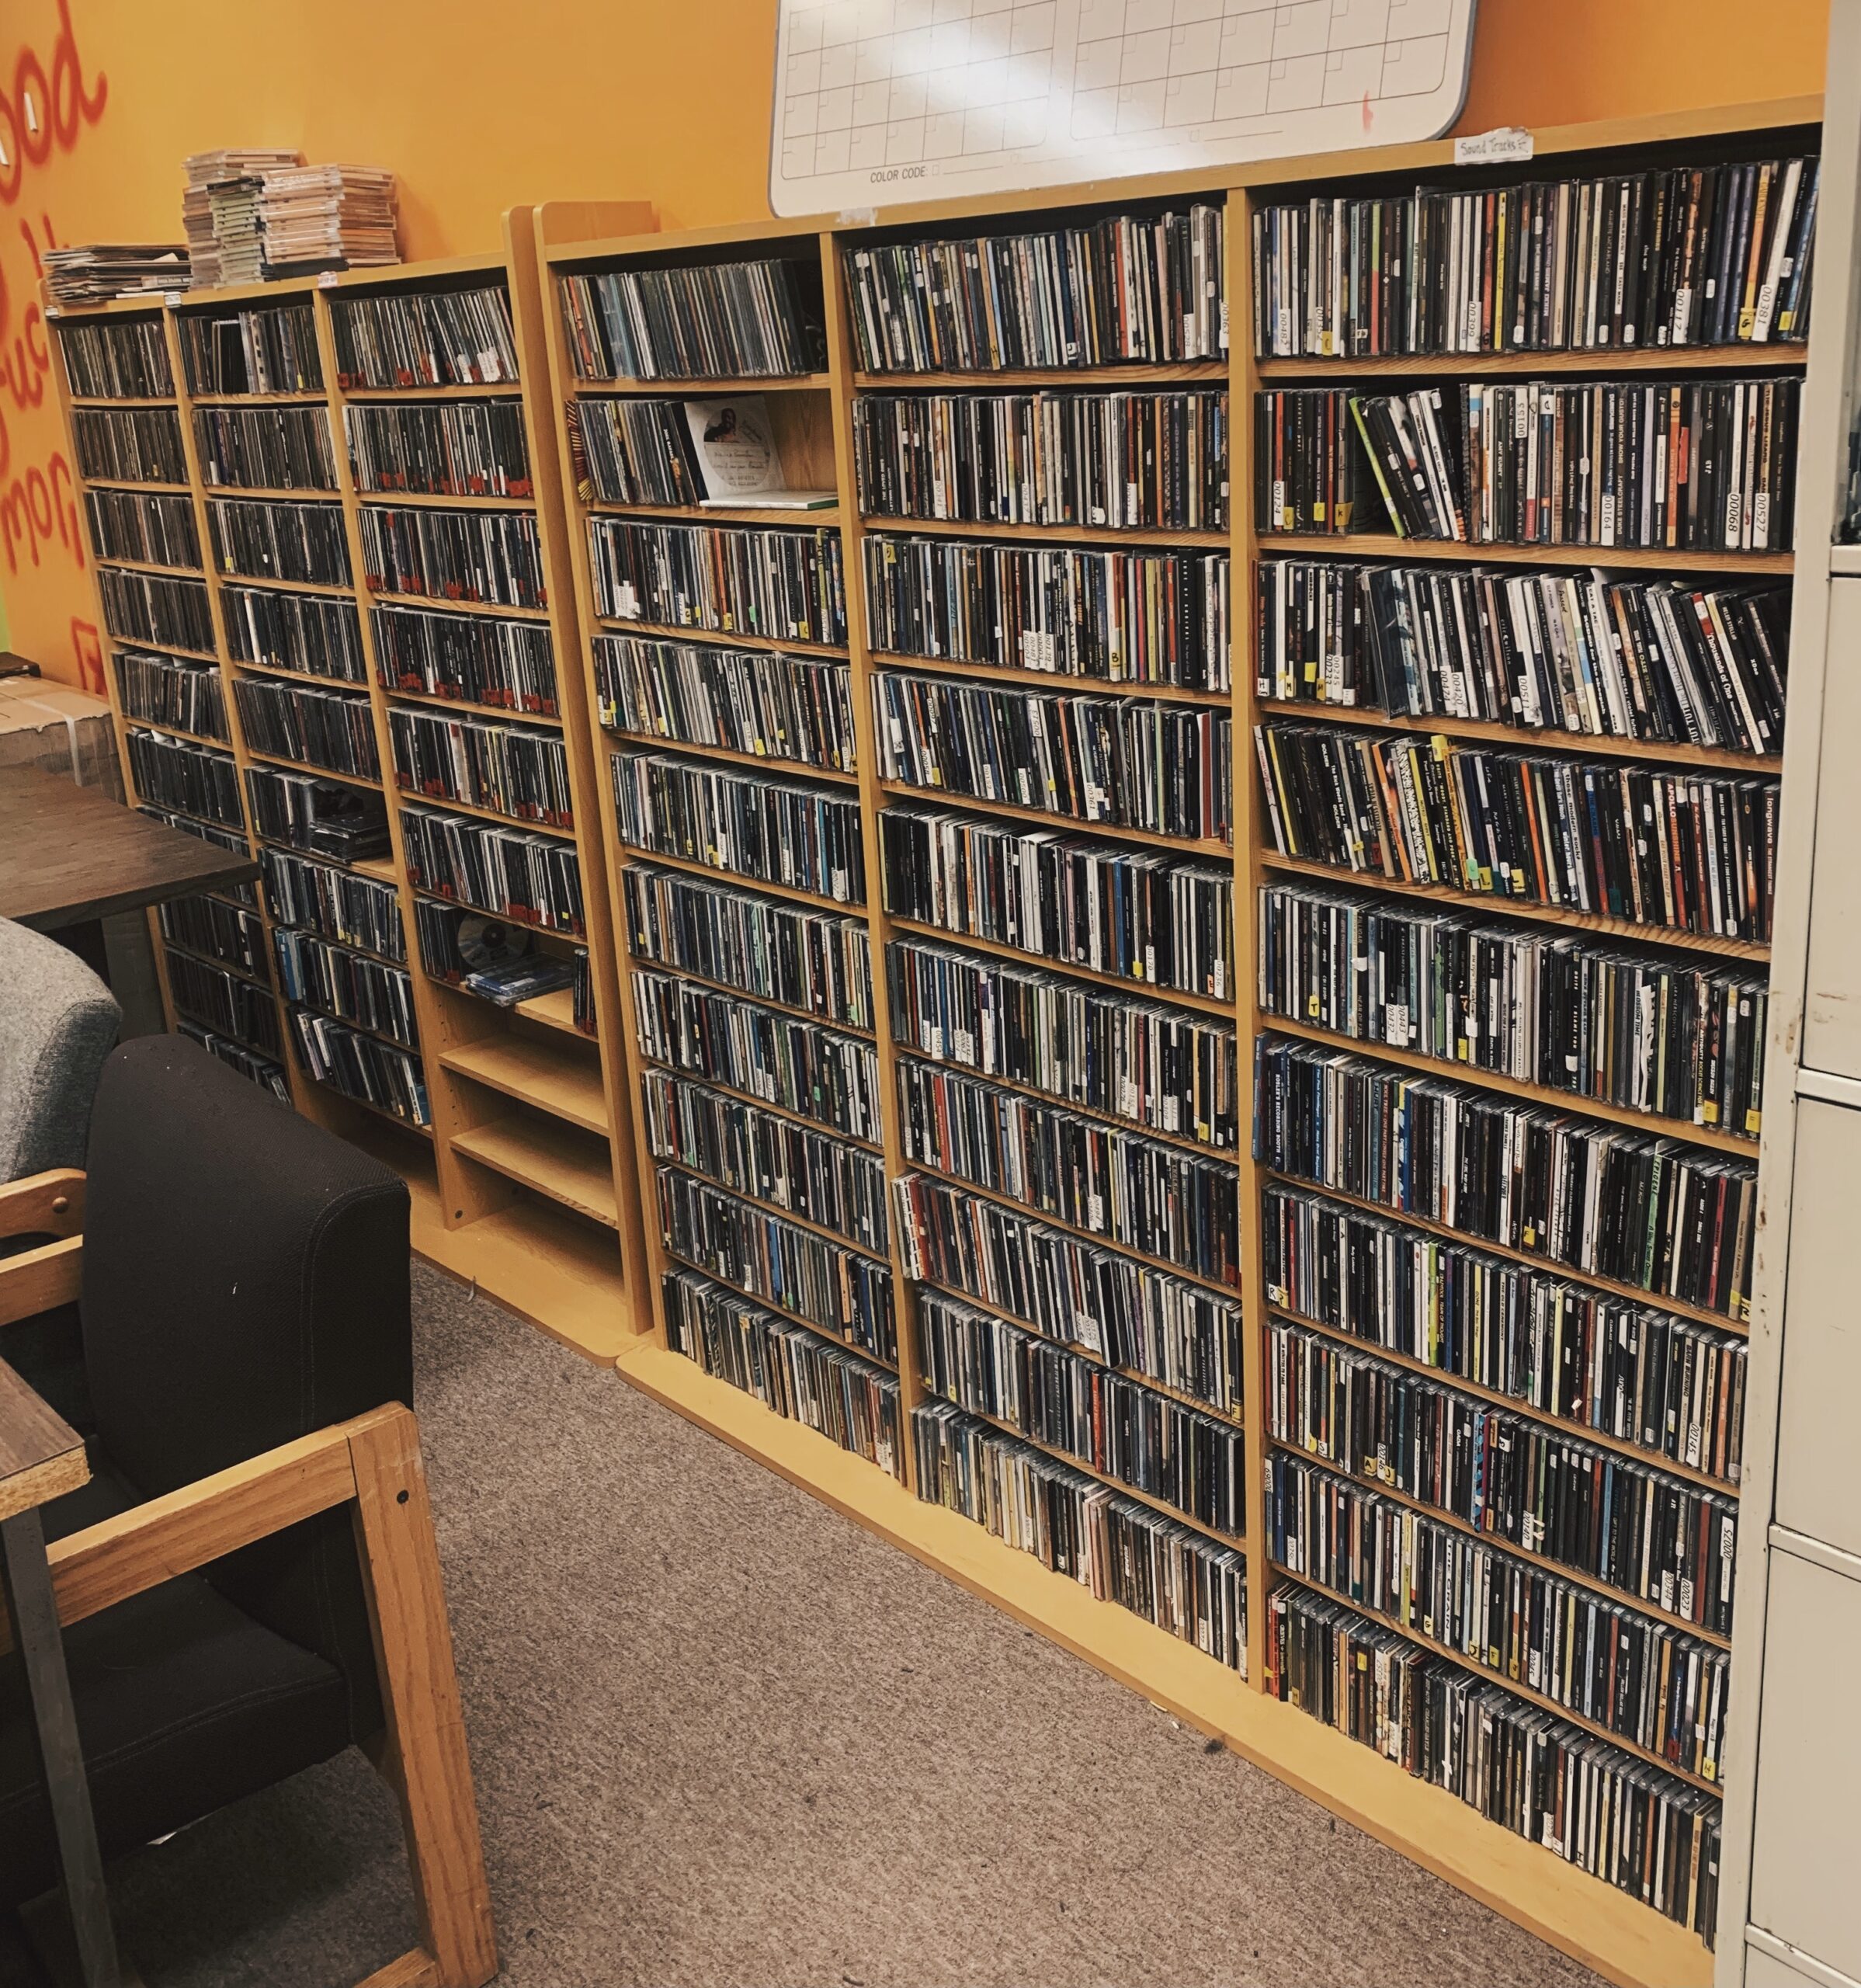 WQHS Radio’s Library Project